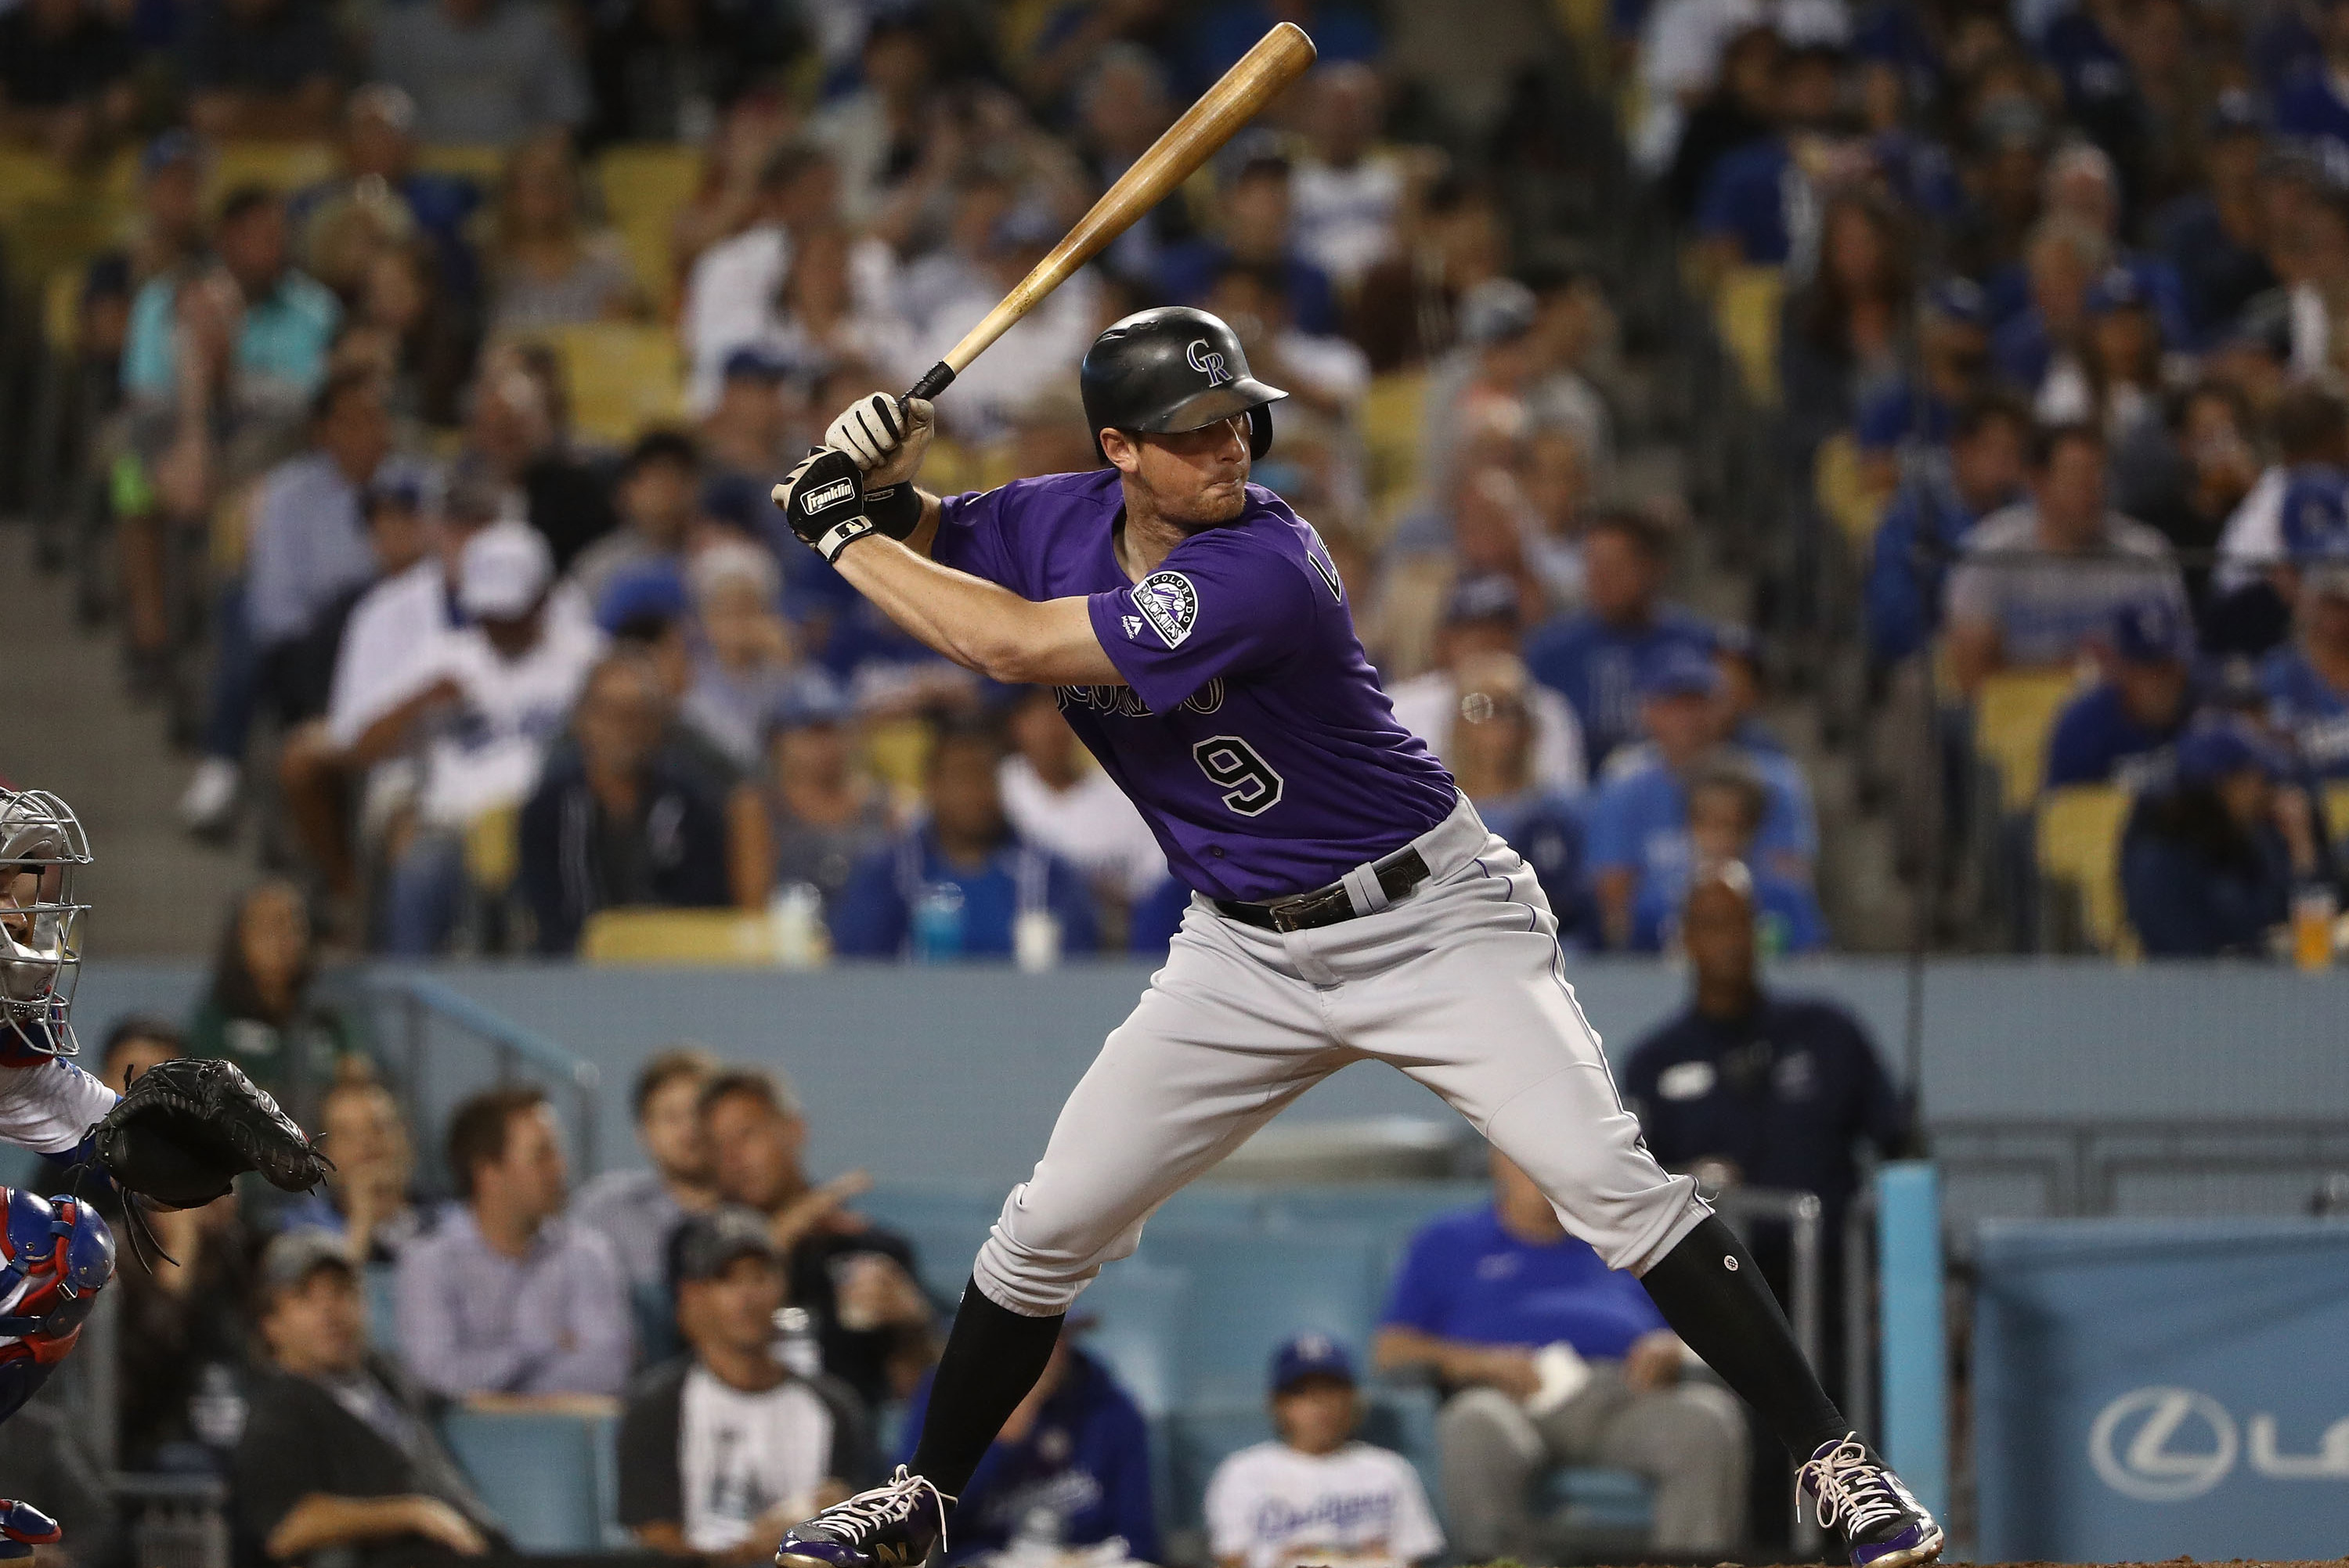 Colorado Rockies 2B DJ LeMahieu has been good, but not quite All-Star  worthy - Purple Row